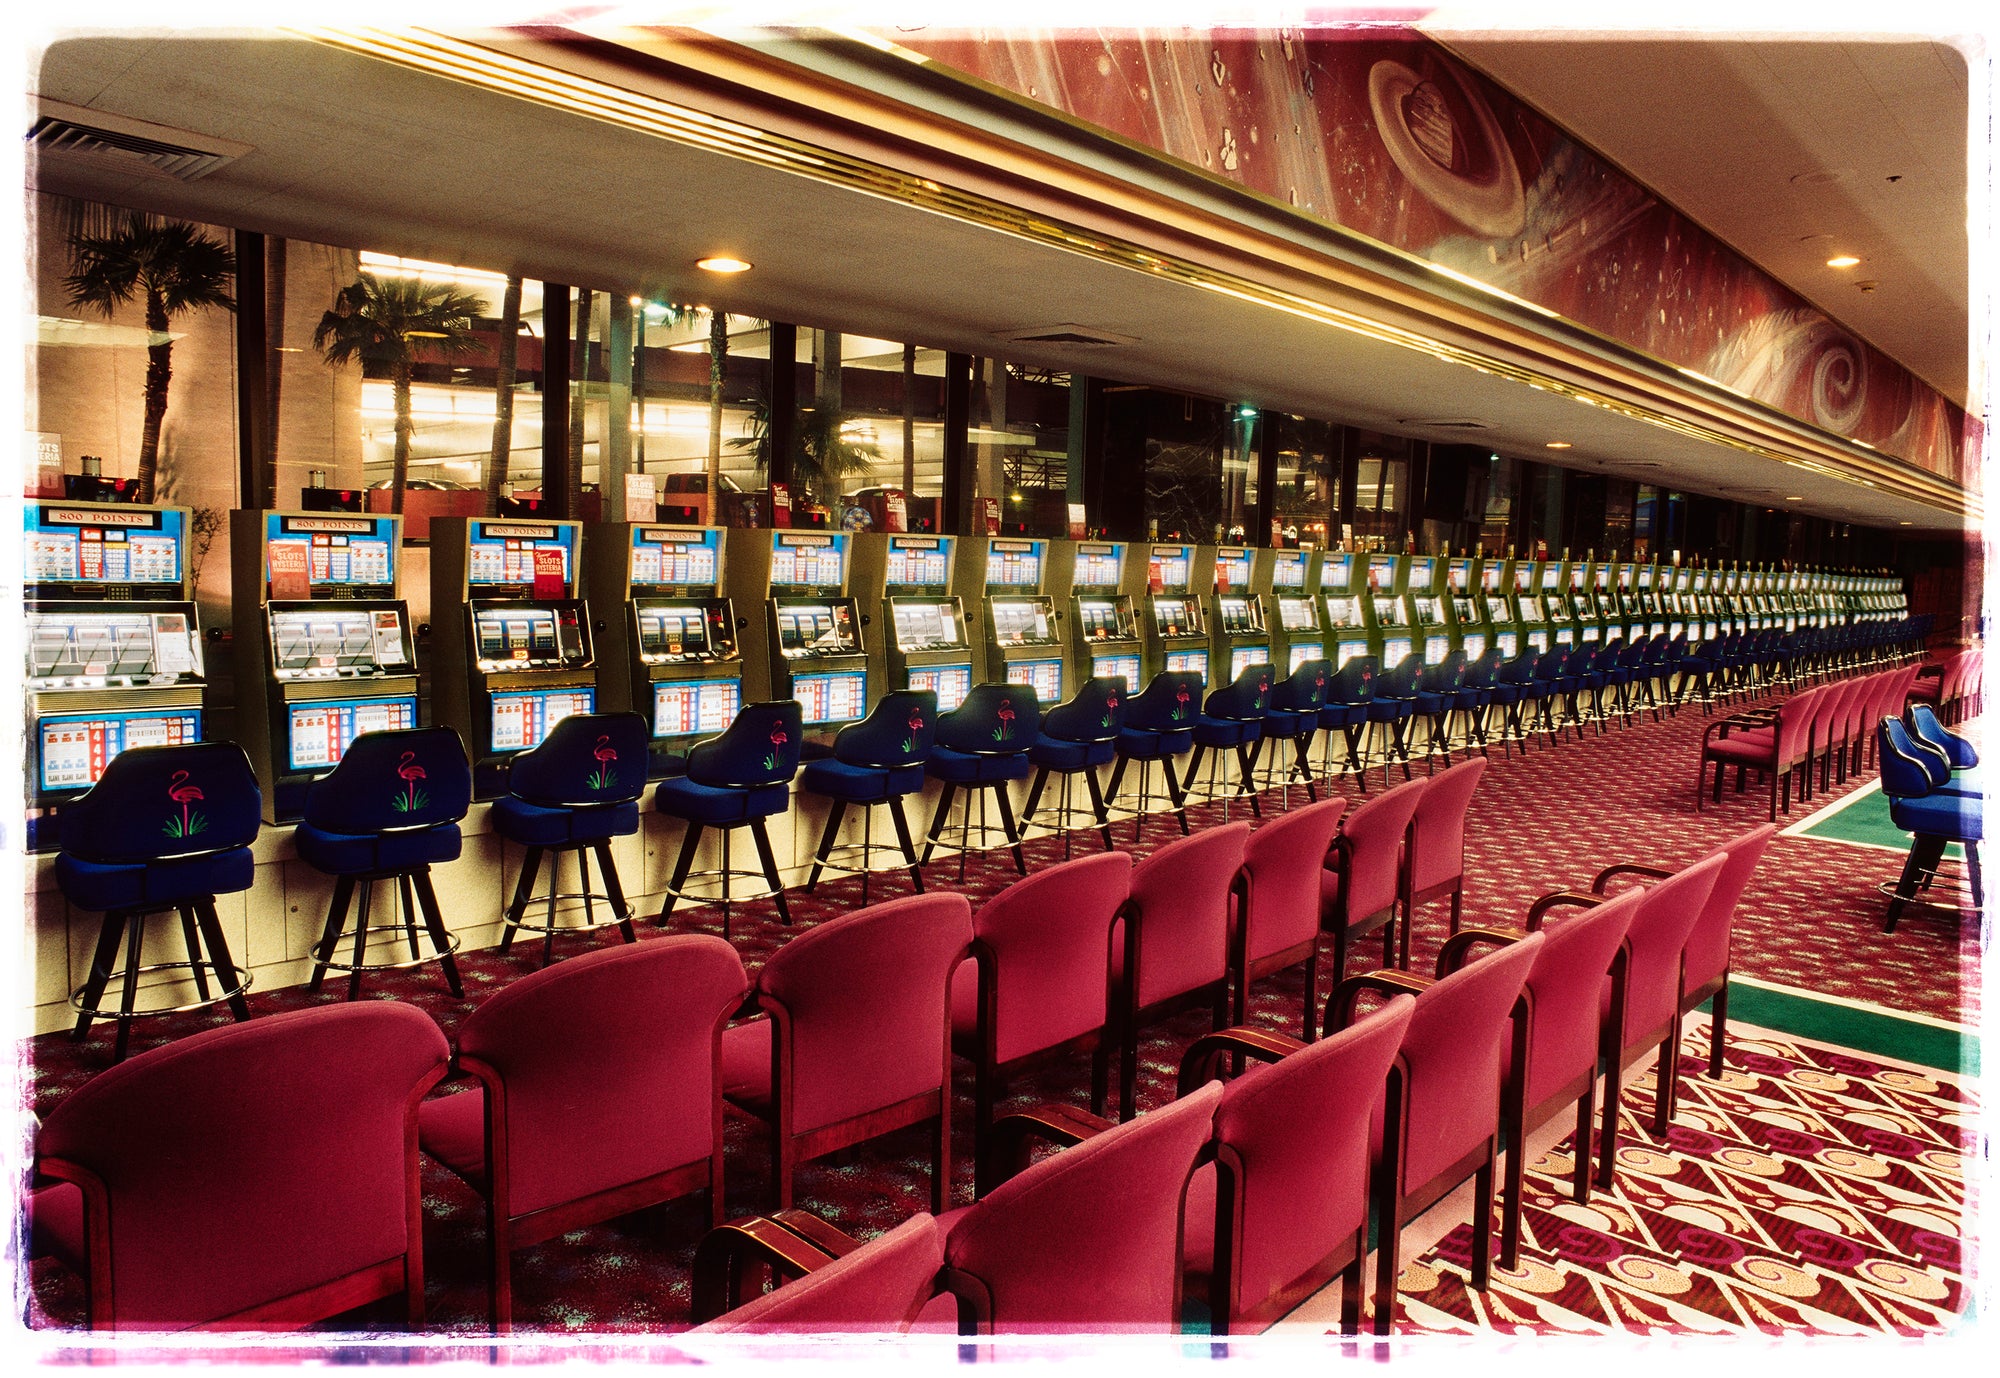 Photograph by Richard Heeps. A line of slot machines sits in a vintage Las Vegas casino. Perspective moves the slot machines from big machines on the left hand side to smaller on the right hand side. In front of the machines are a row of neatly lined blue stools one per machine and then red spectators chairs are neatly lined sitting forefront of the shot.